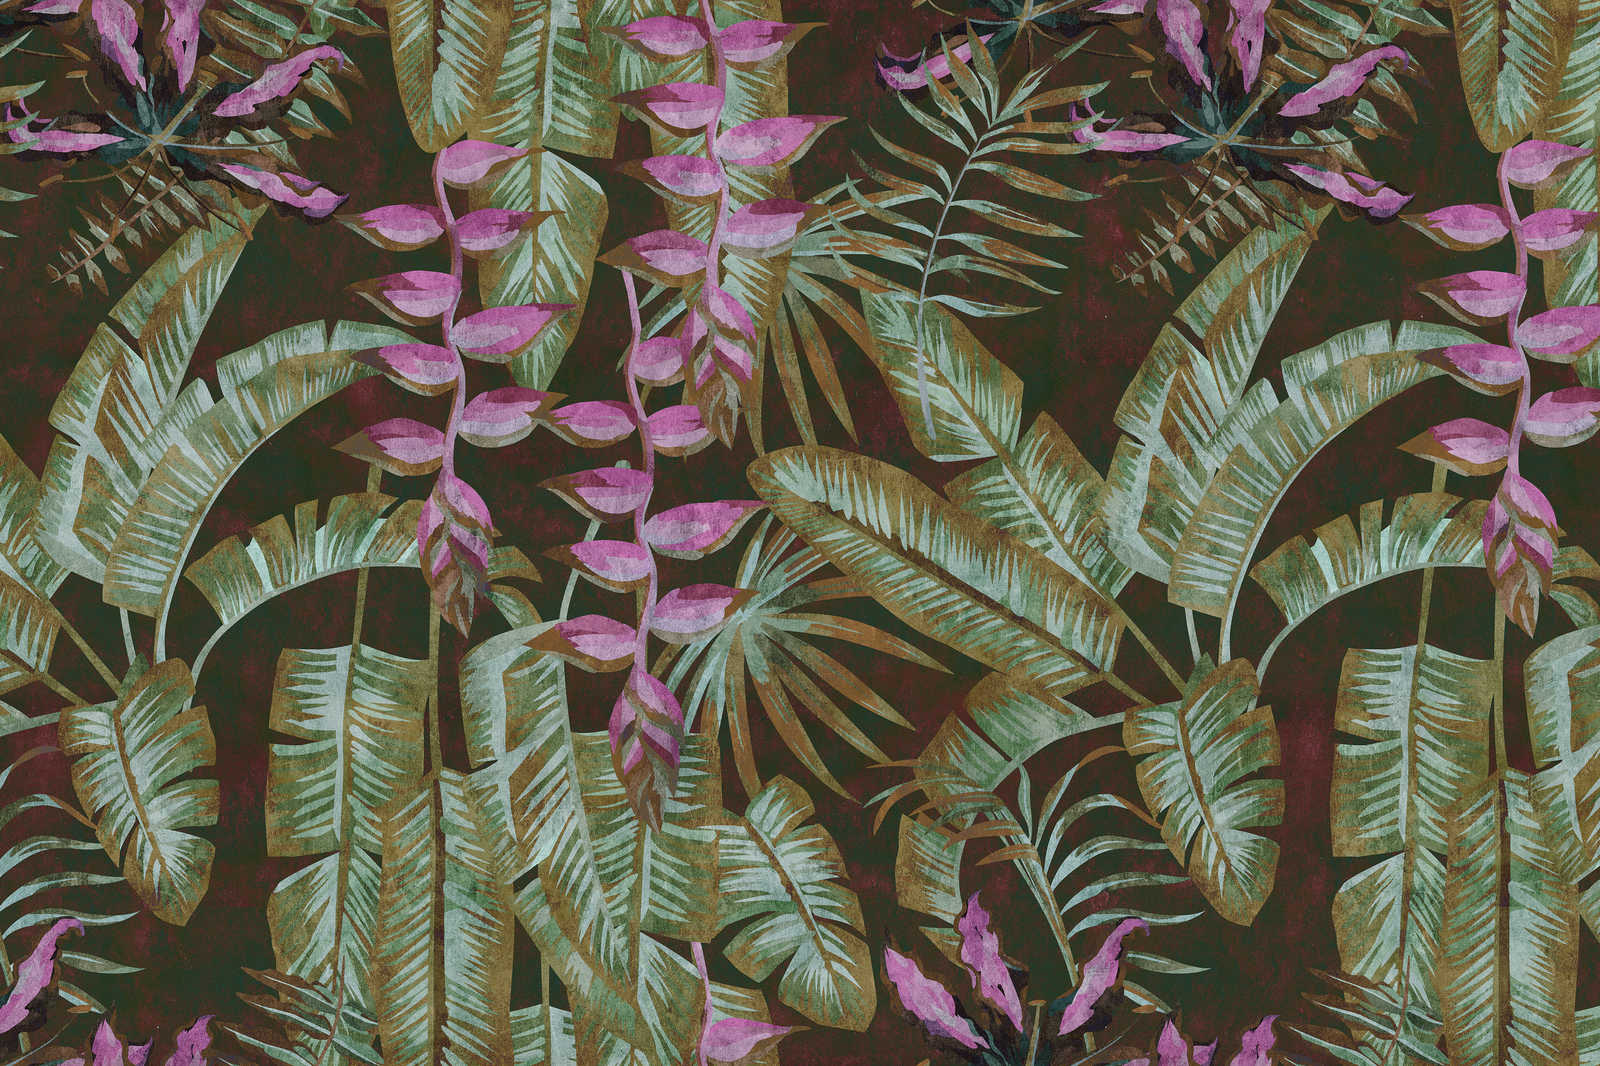             Tropicana 1 - Jungle Canvas Painting with Banana Leaves & Ferns - 1.20 m x 0.80 m
        